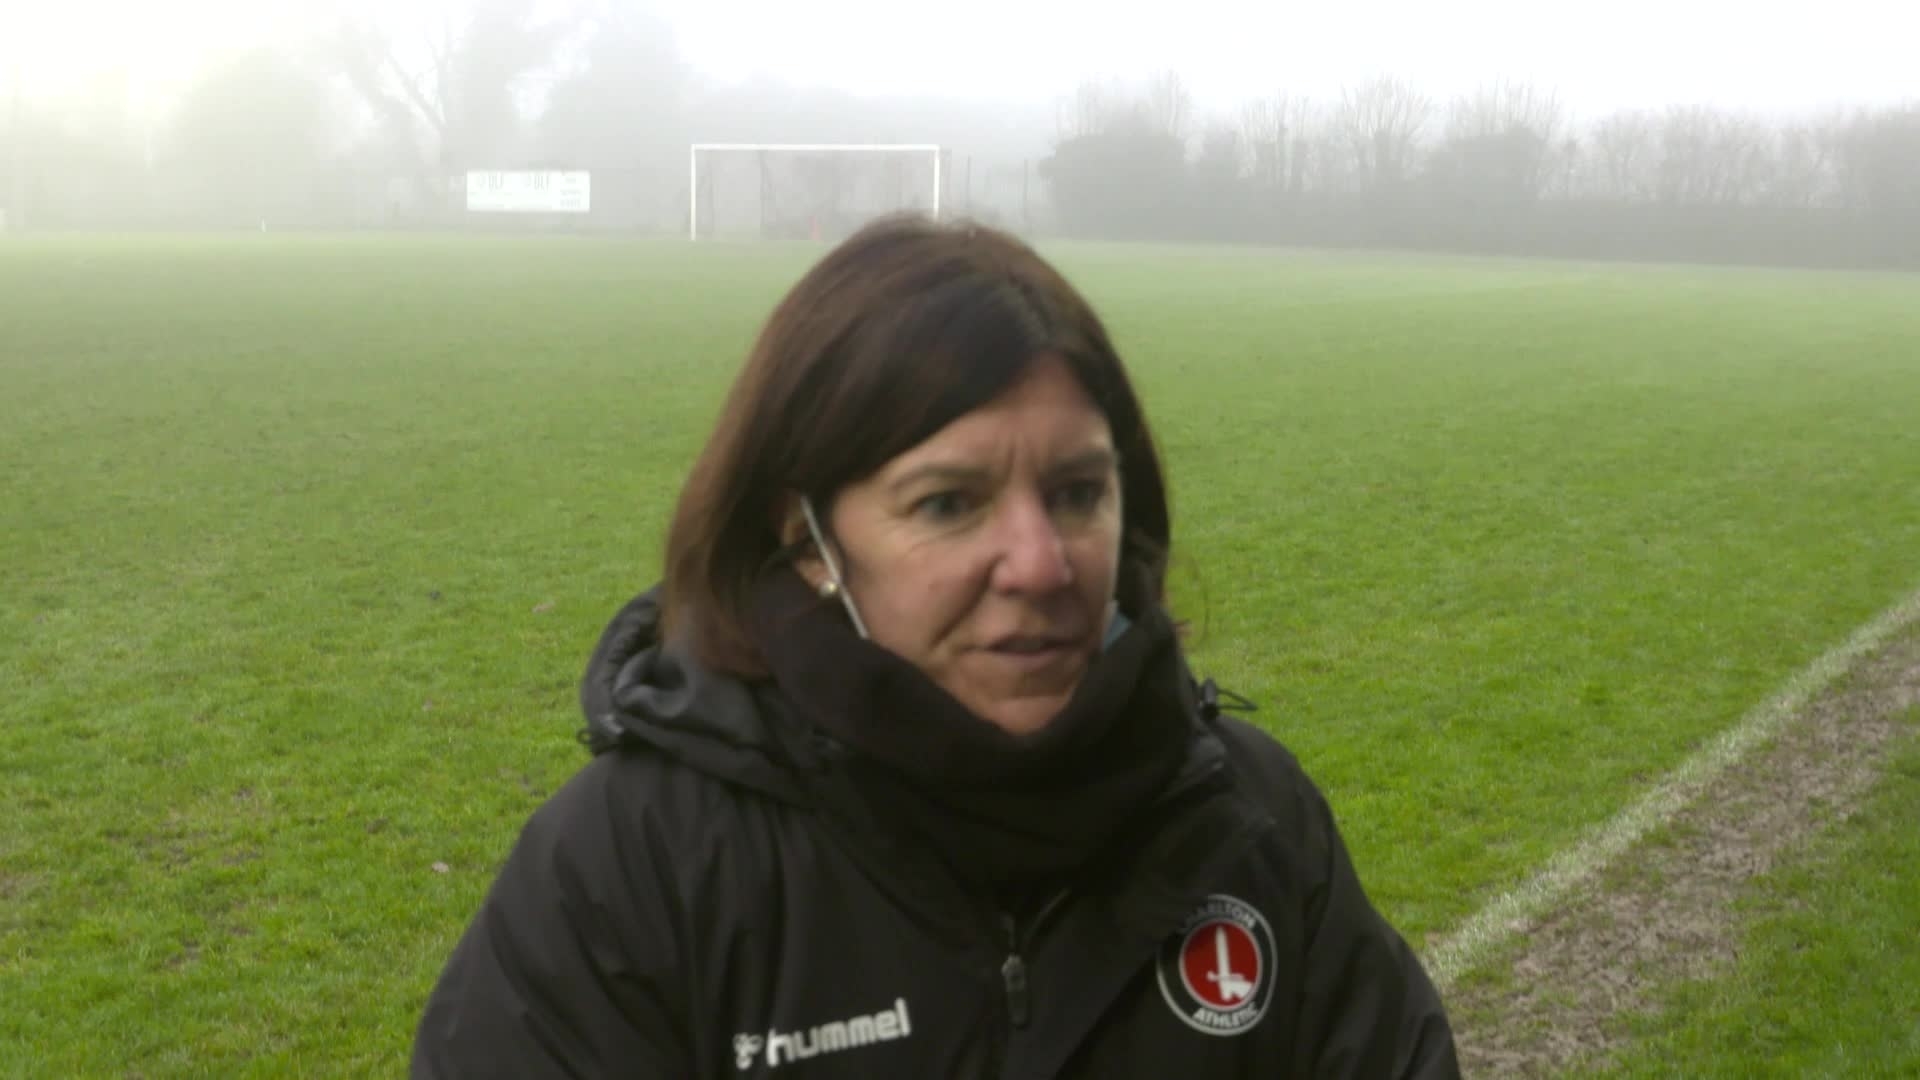 Karen Hills on a 1-0 win at Gillingham in the FA Cup (December 2021)